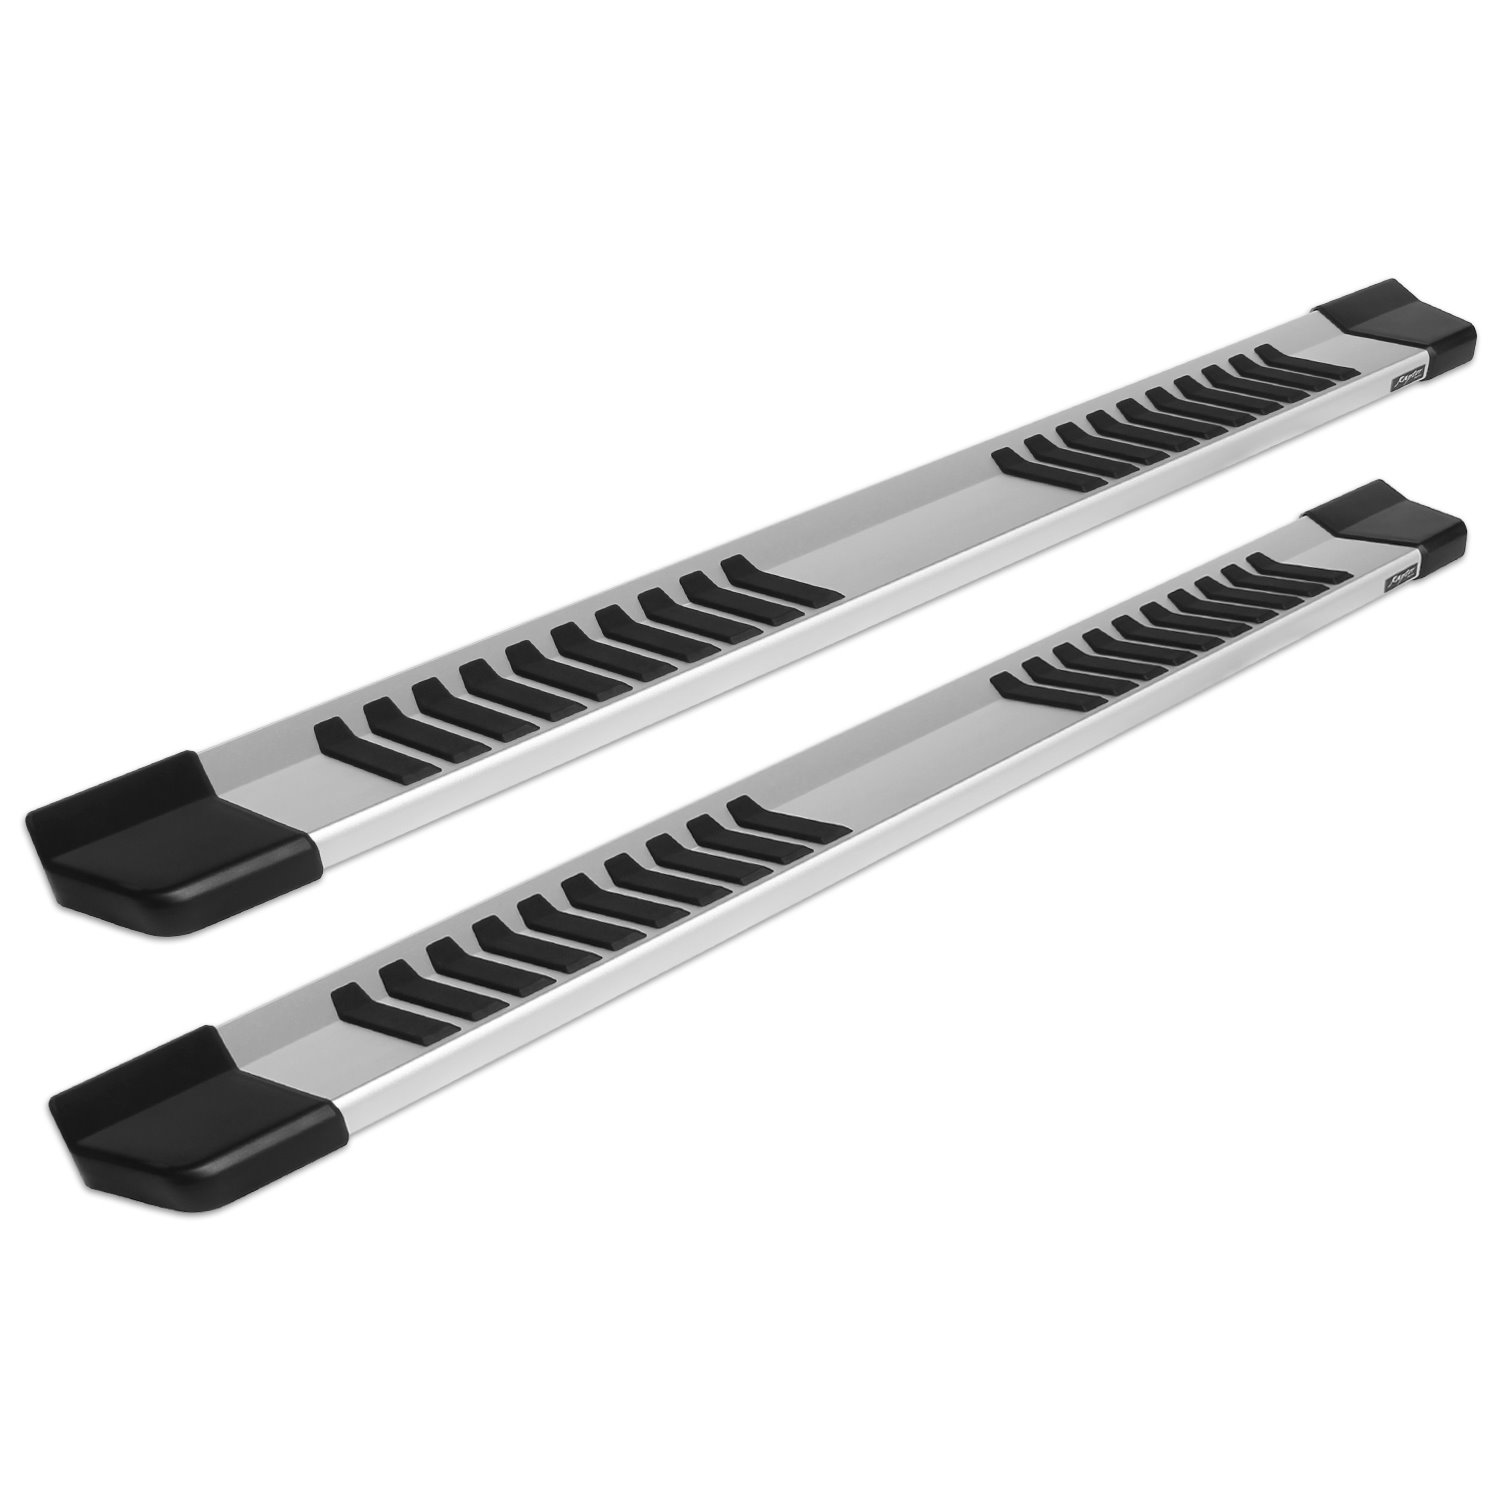 1707-0589 Raptor Series 6 in OEM Style Slide Track Running Boards, Brushed Aluminum, Fits Select Nissan Frontier Crew Cab